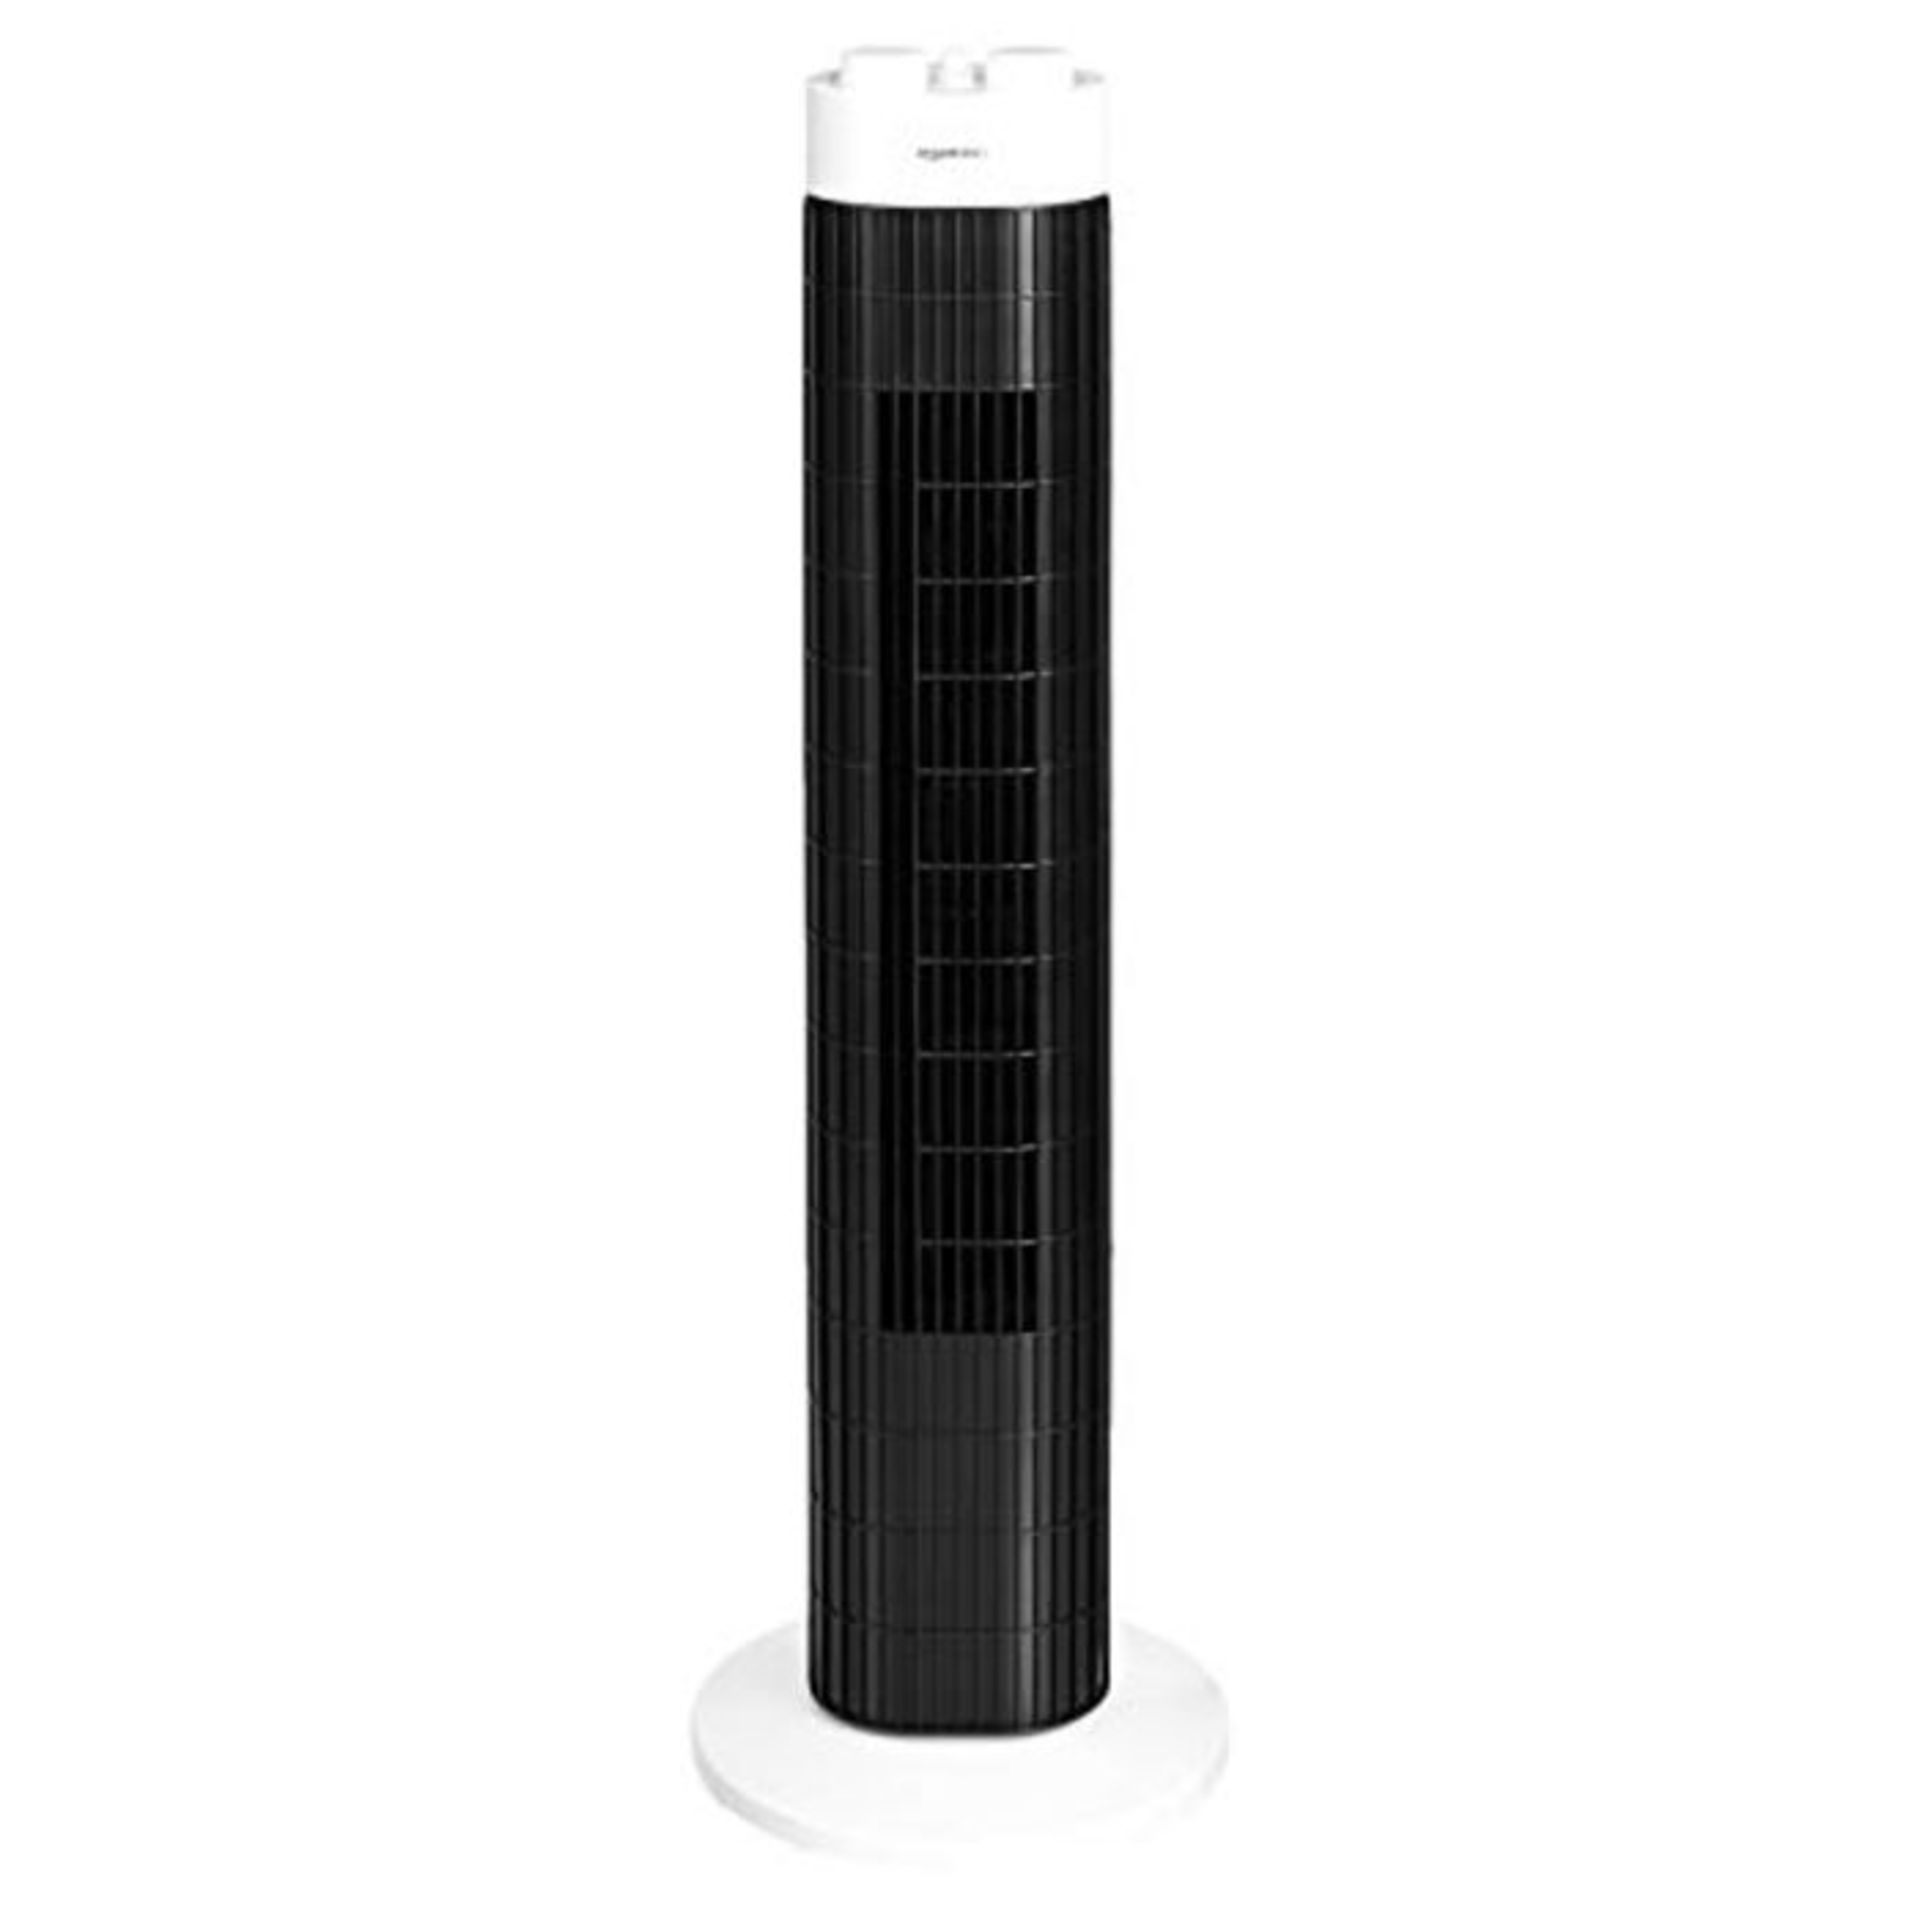 Amazon Basics 3 Speed Oscillating Portable Tower Fan with Timer, 45 W